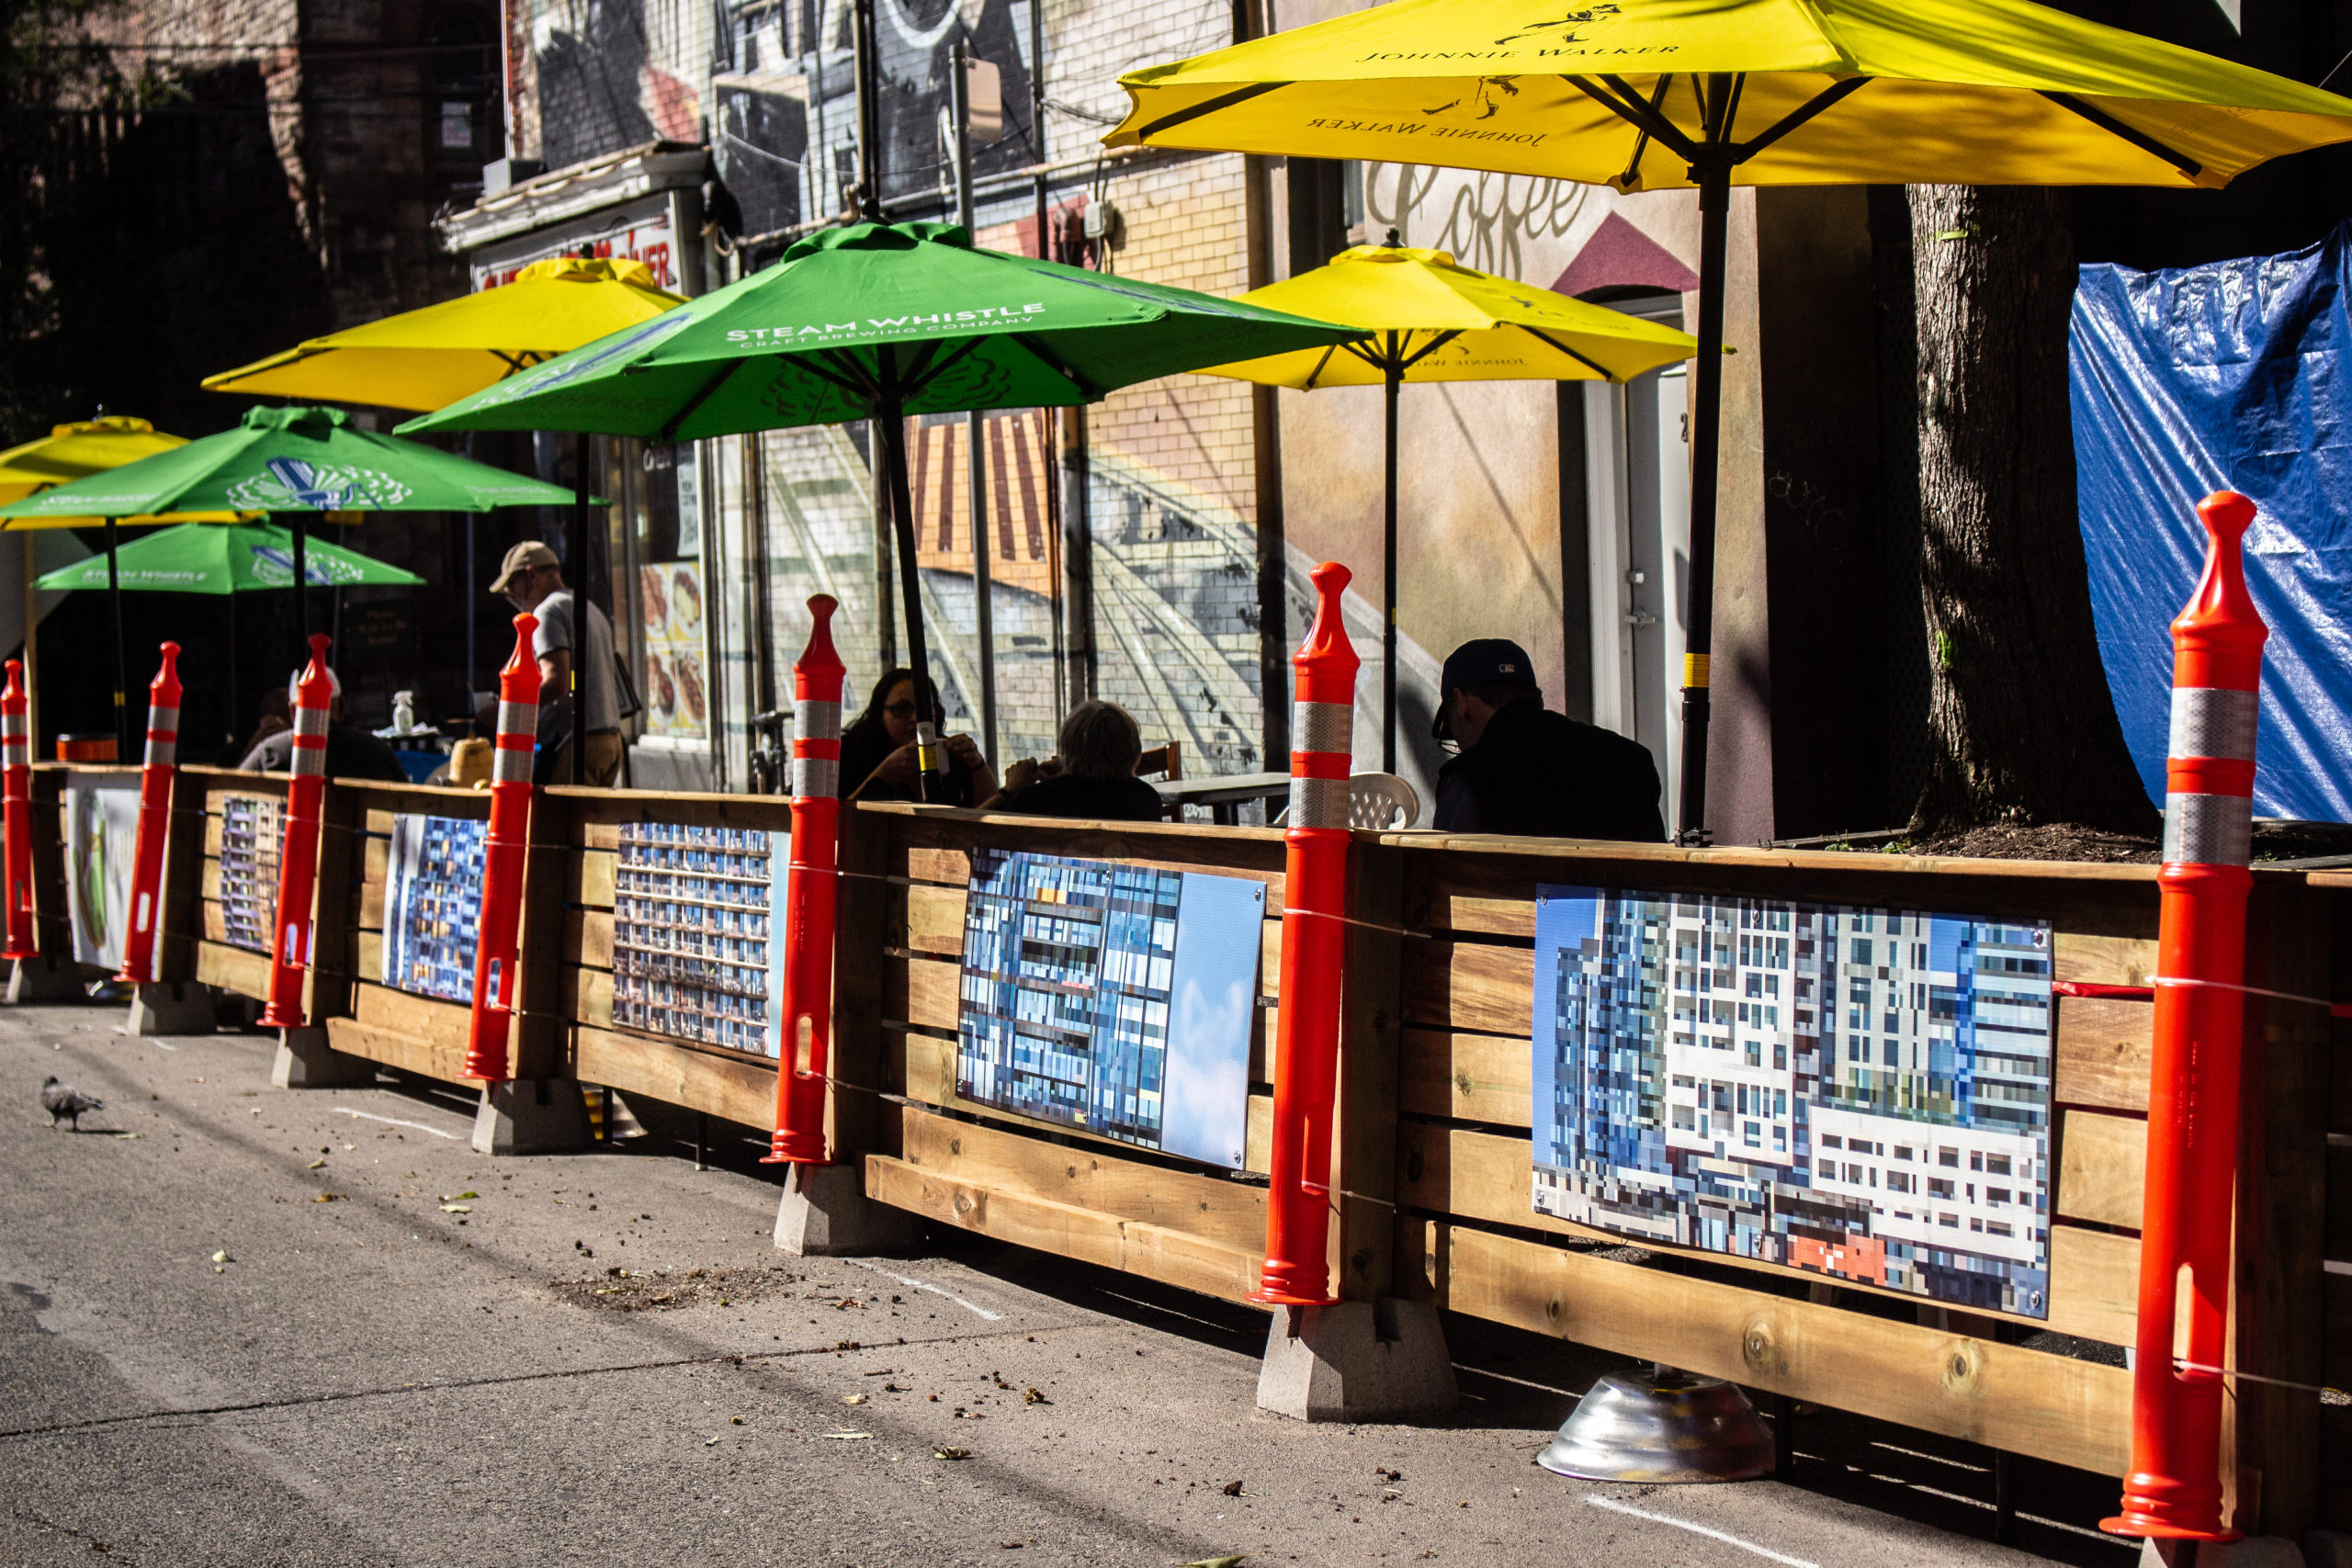 Duncan C. McLean's Main St exhibit that has high-rise condos in Toronto, there are patio umbrellas and street visible